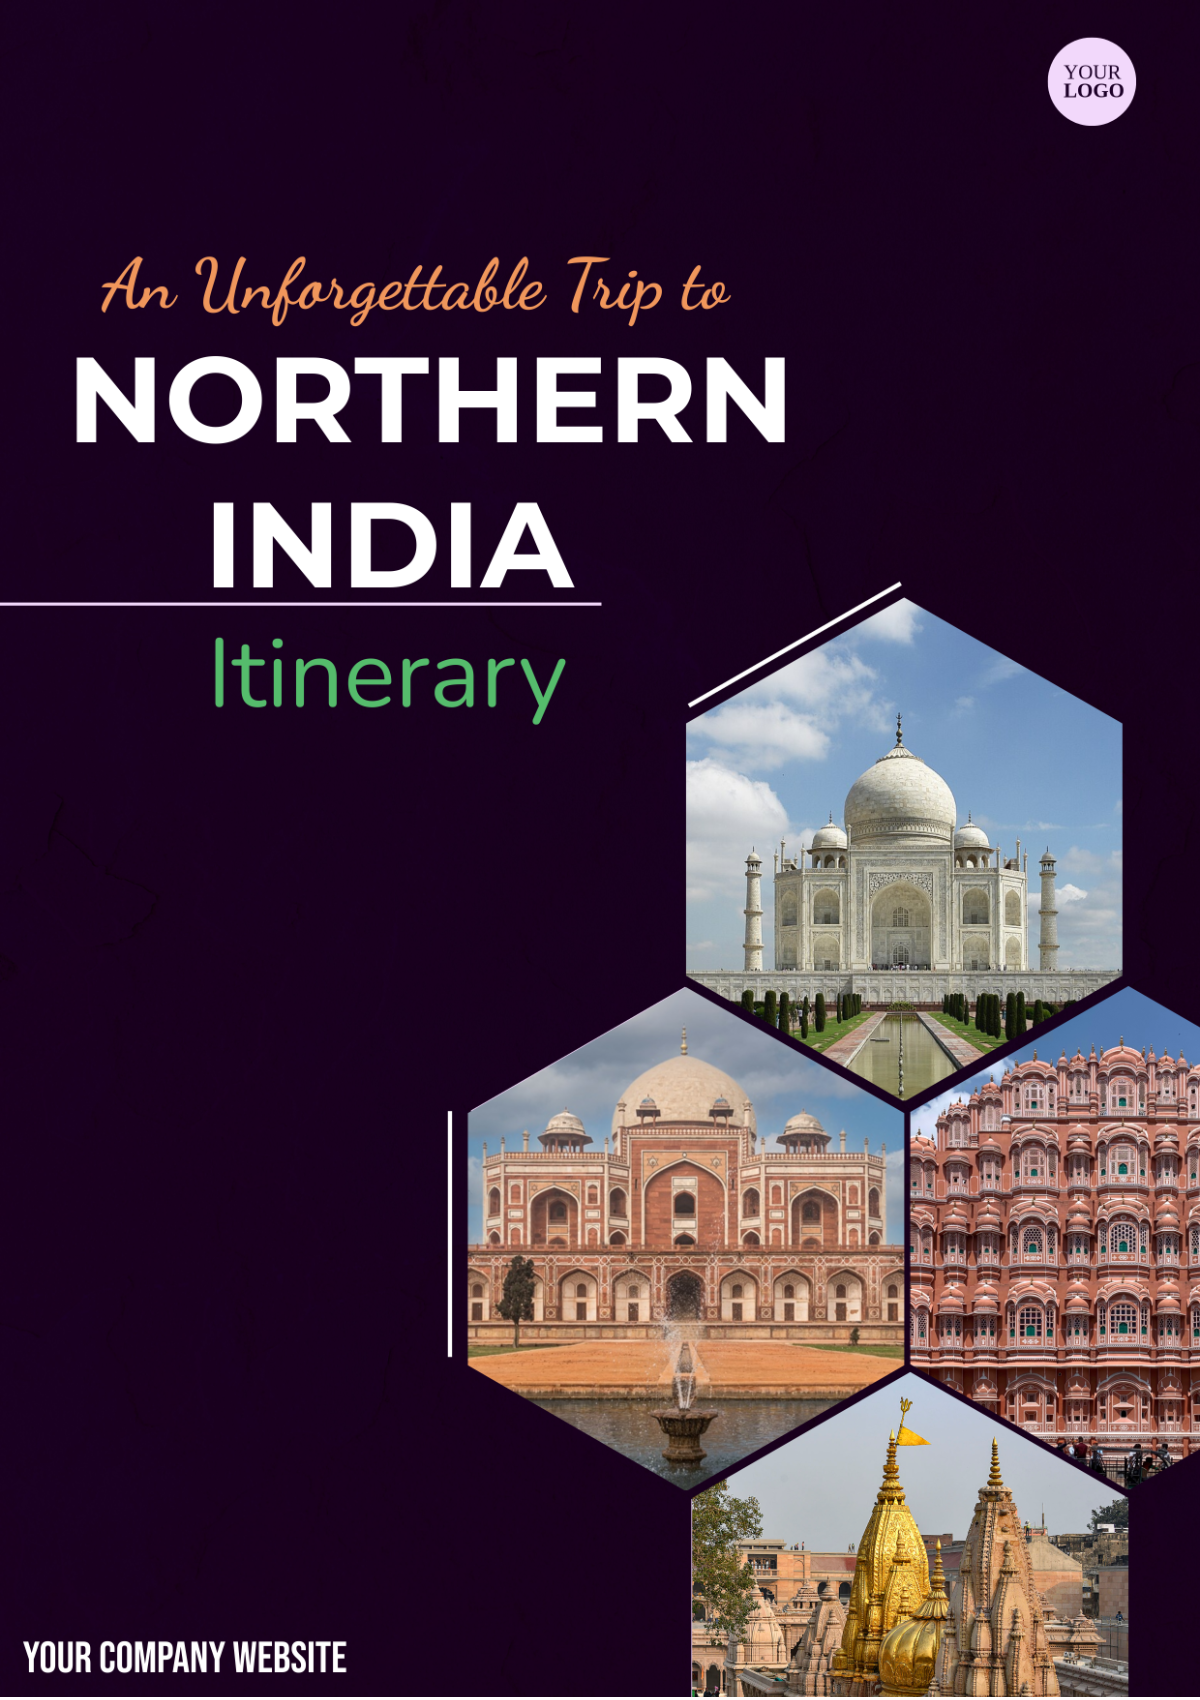 Northern India Itinerary Template